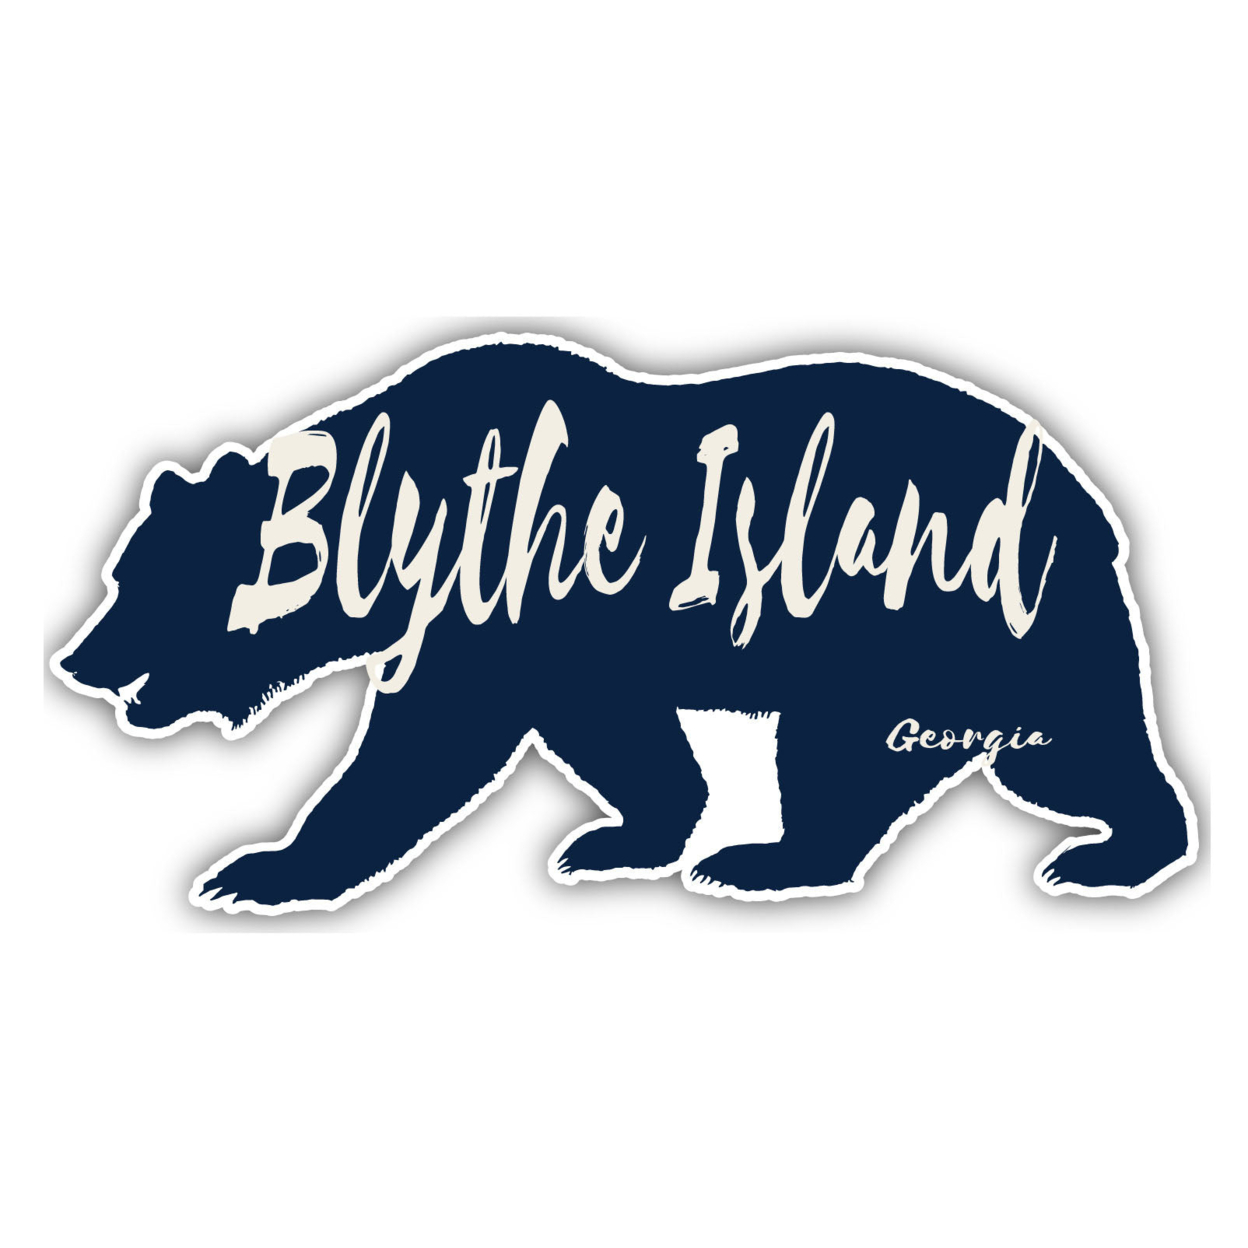 Blythe Island Georgia Souvenir Decorative Stickers (Choose Theme And Size) - 4-Pack, 6-Inch, Tent